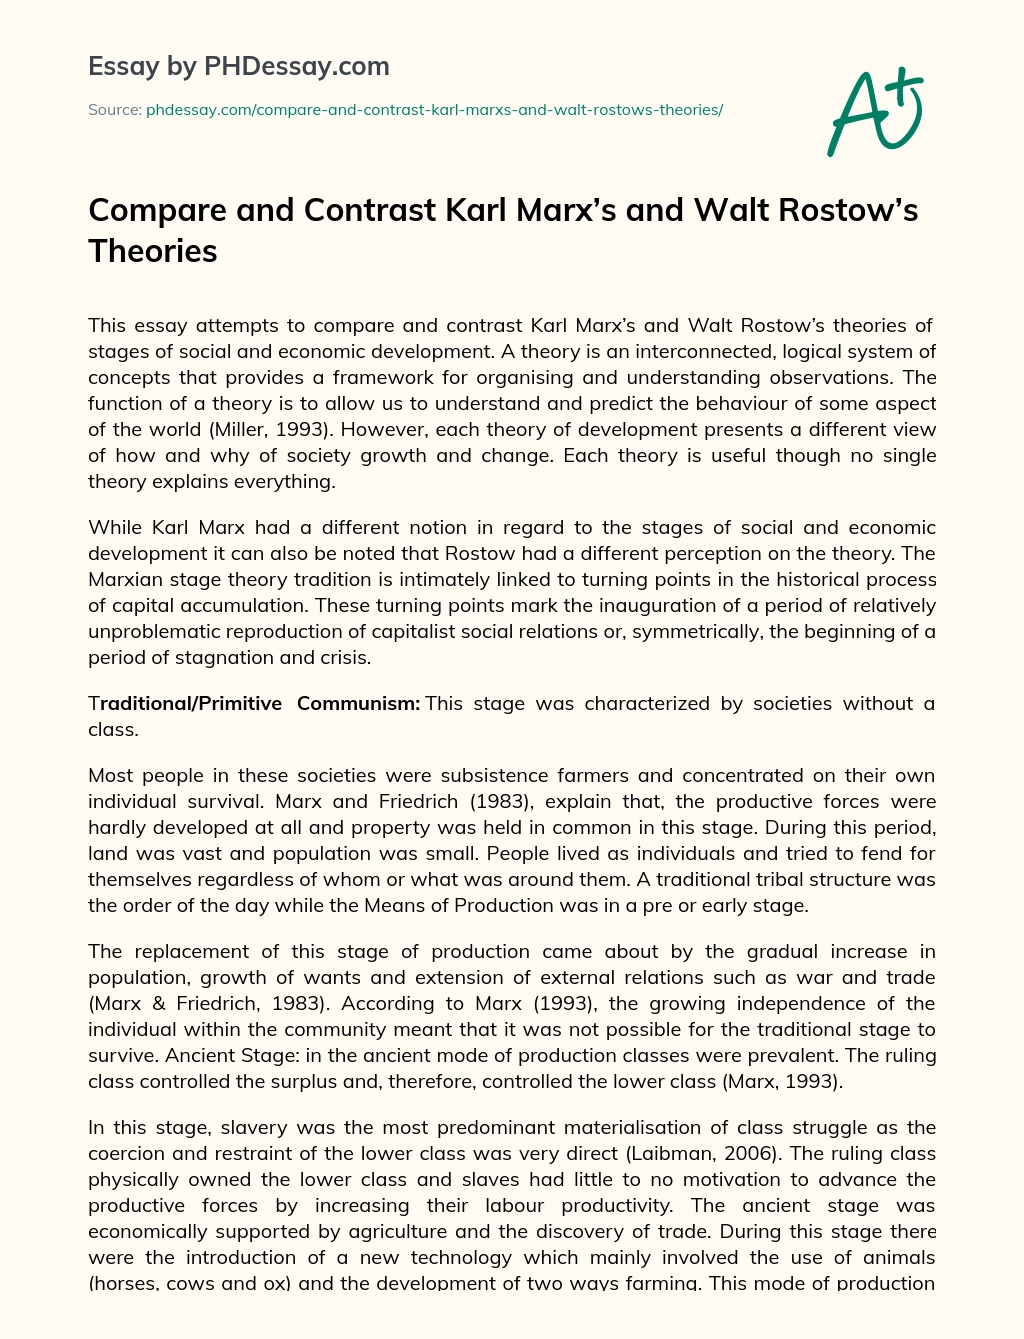 Compare and Contrast Karl Marx’s and Walt Rostow’s Theories essay